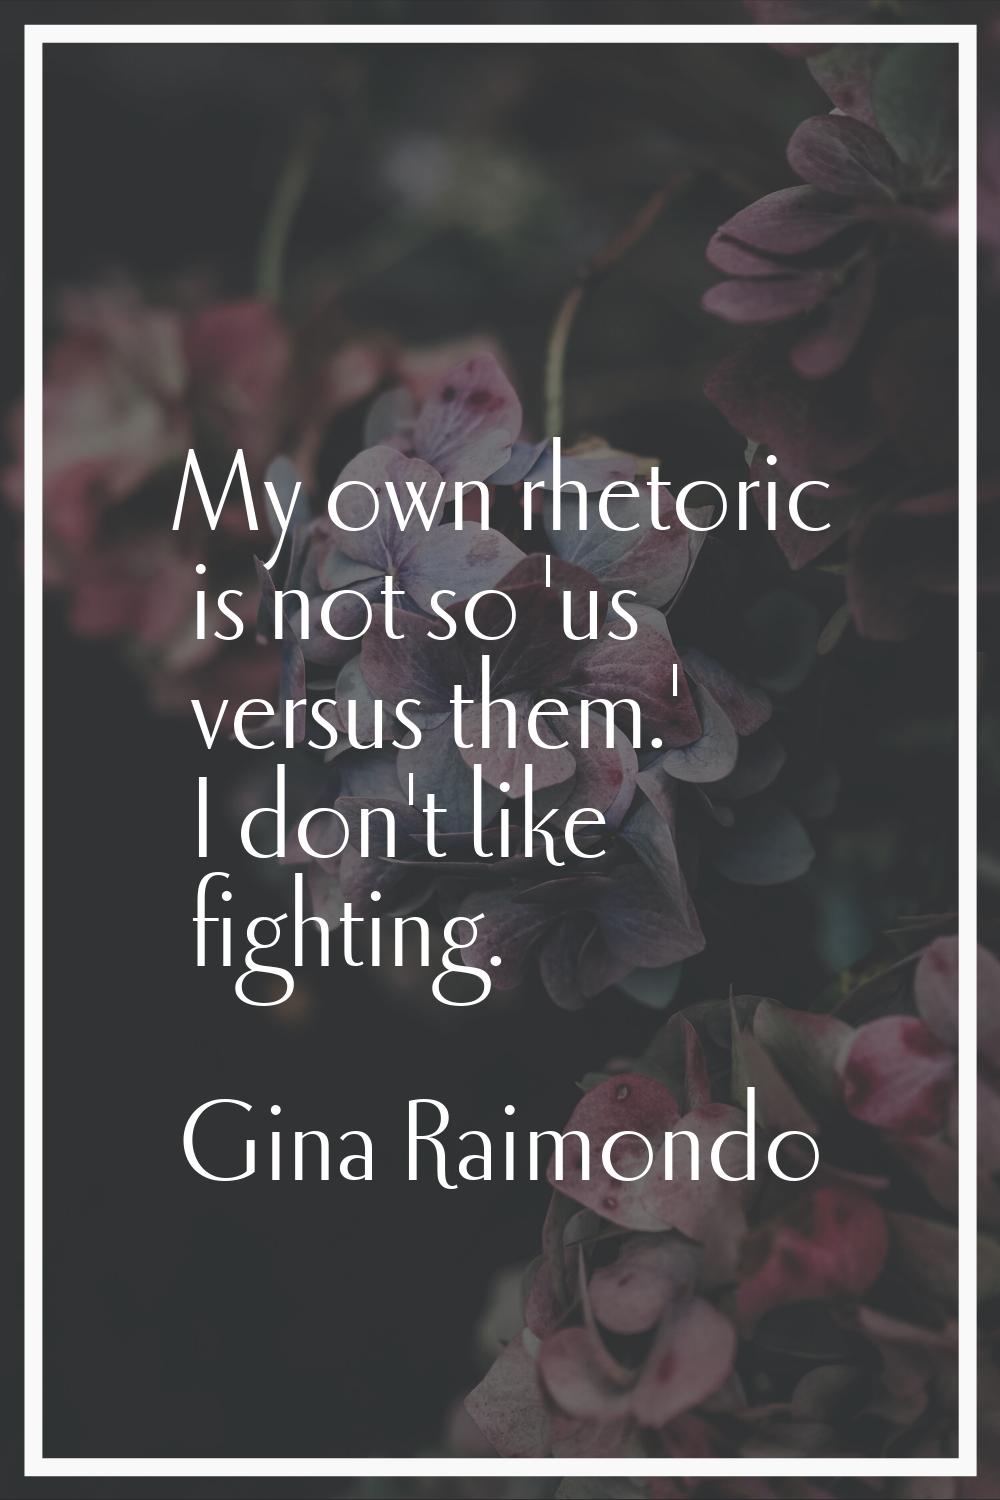 My own rhetoric is not so 'us versus them.' I don't like fighting.